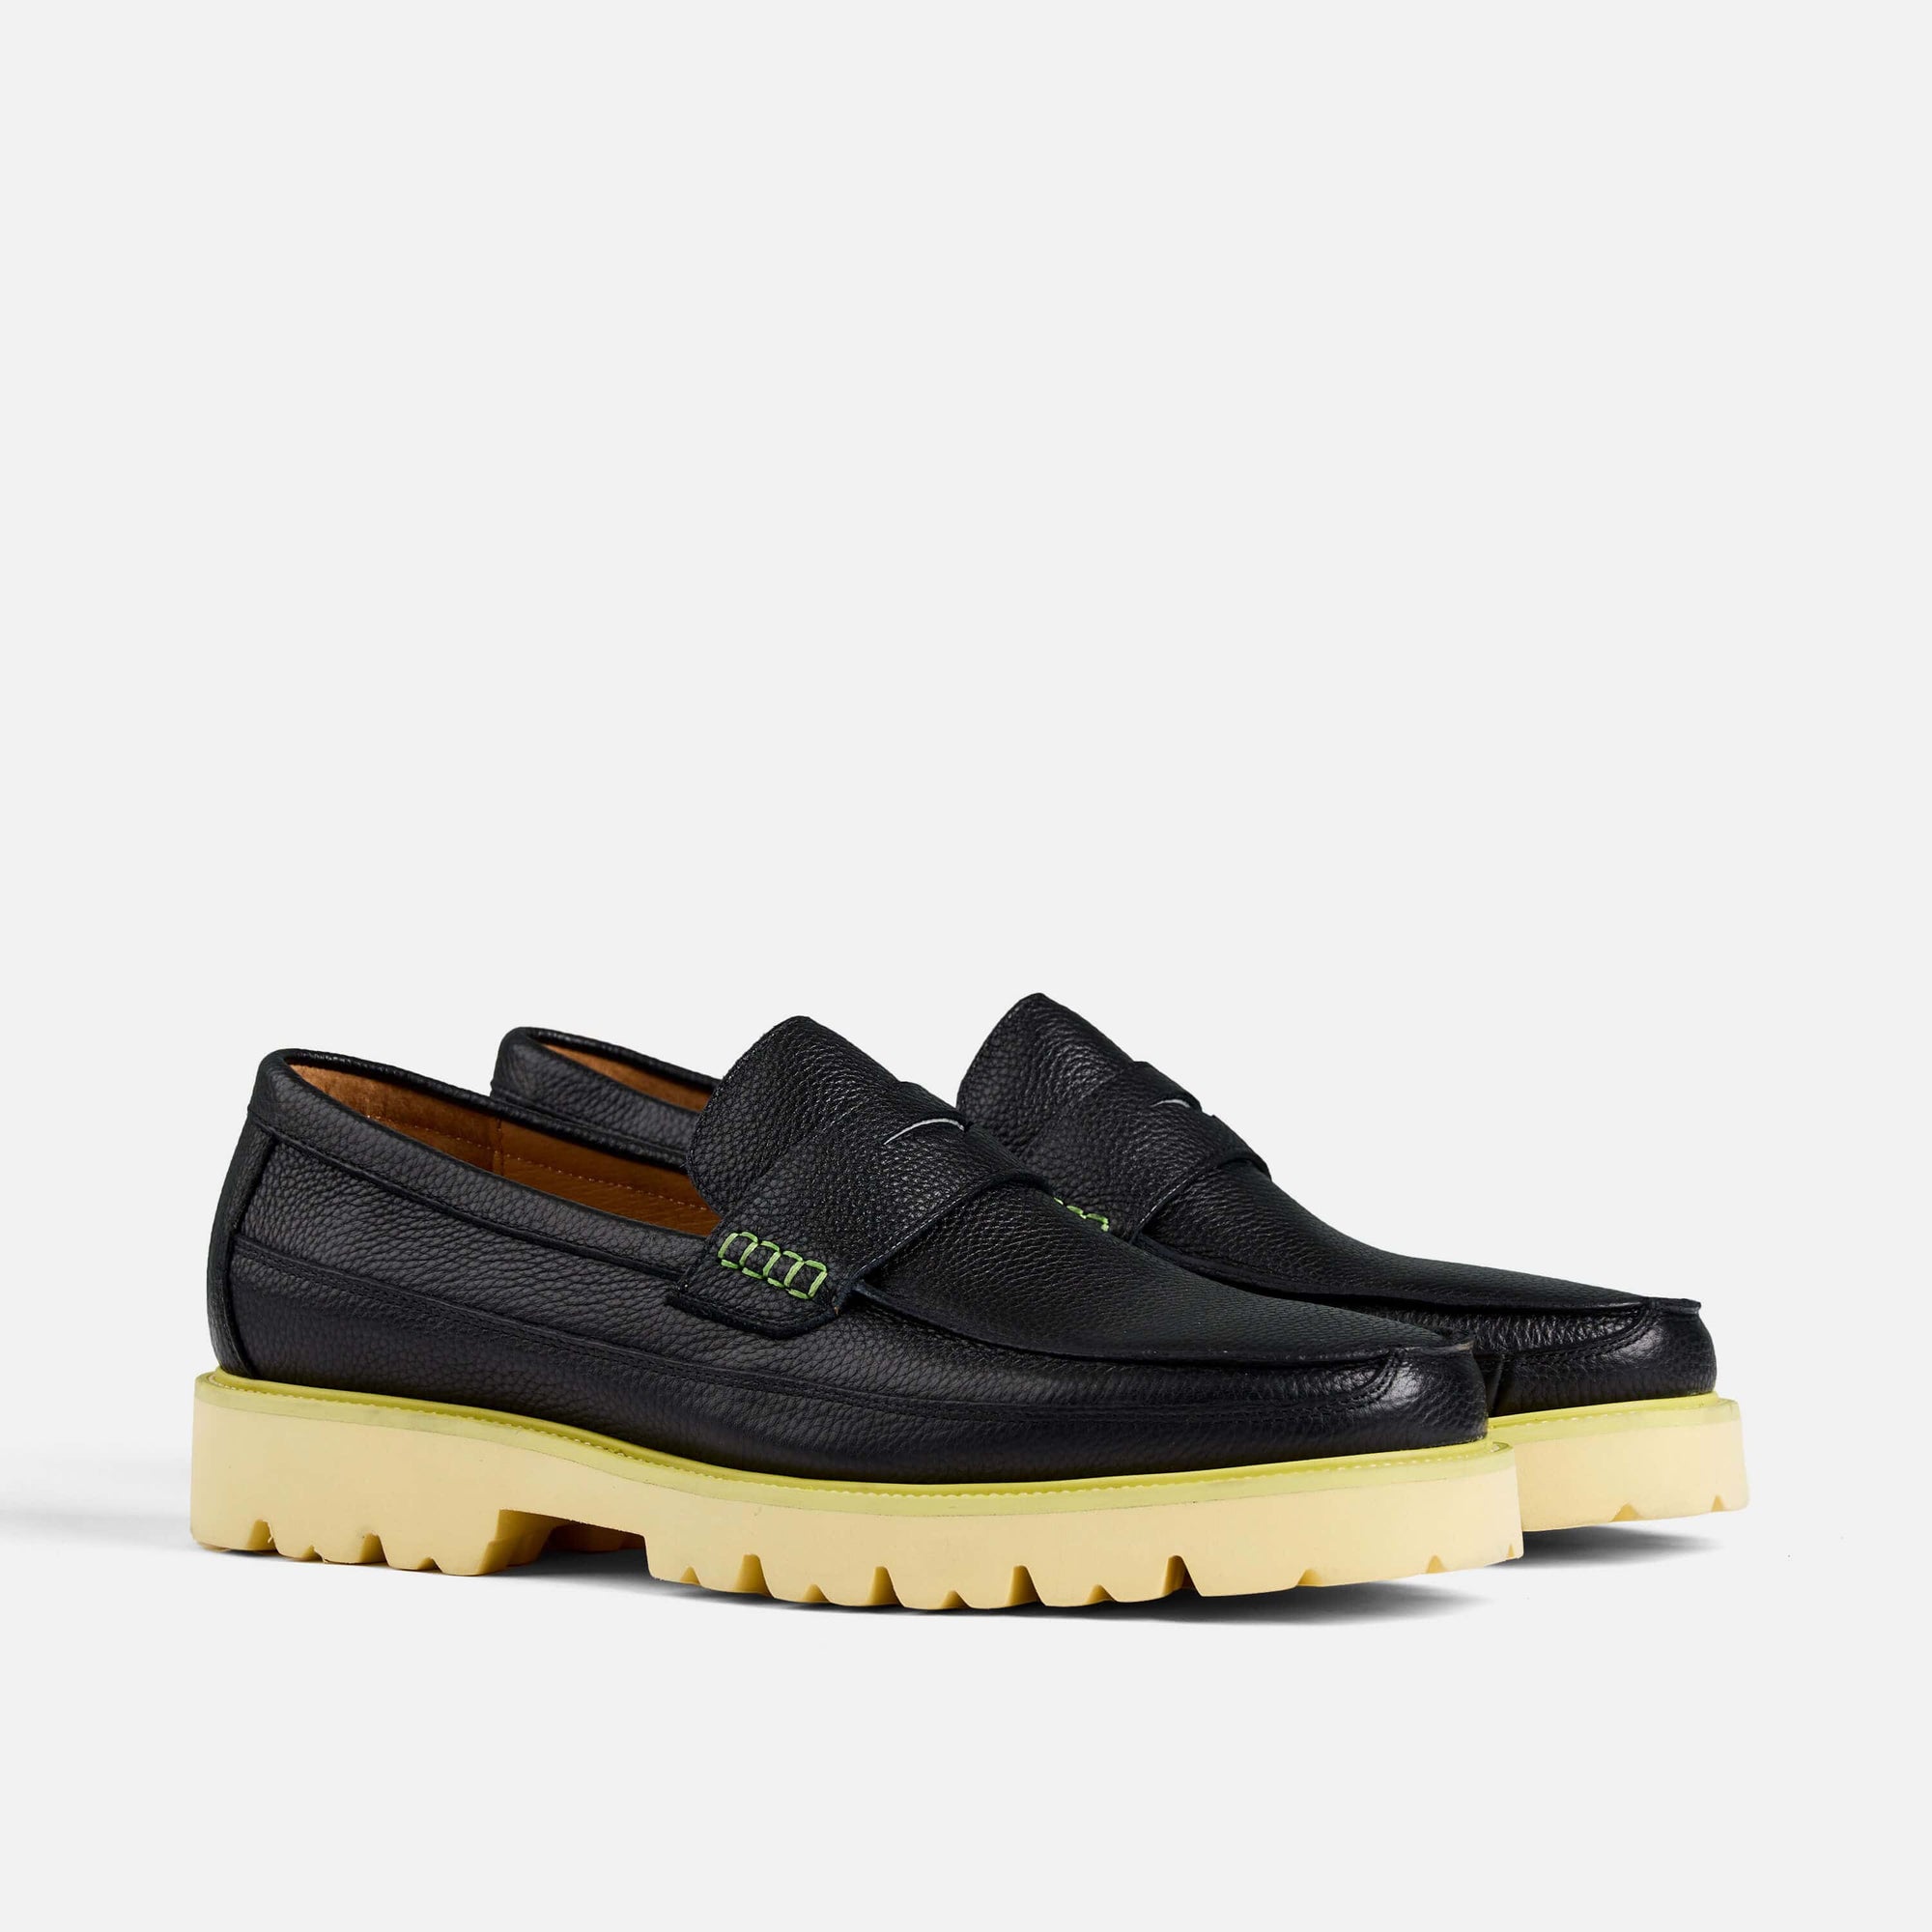 Adler Black Neon Leather Penny Loafers